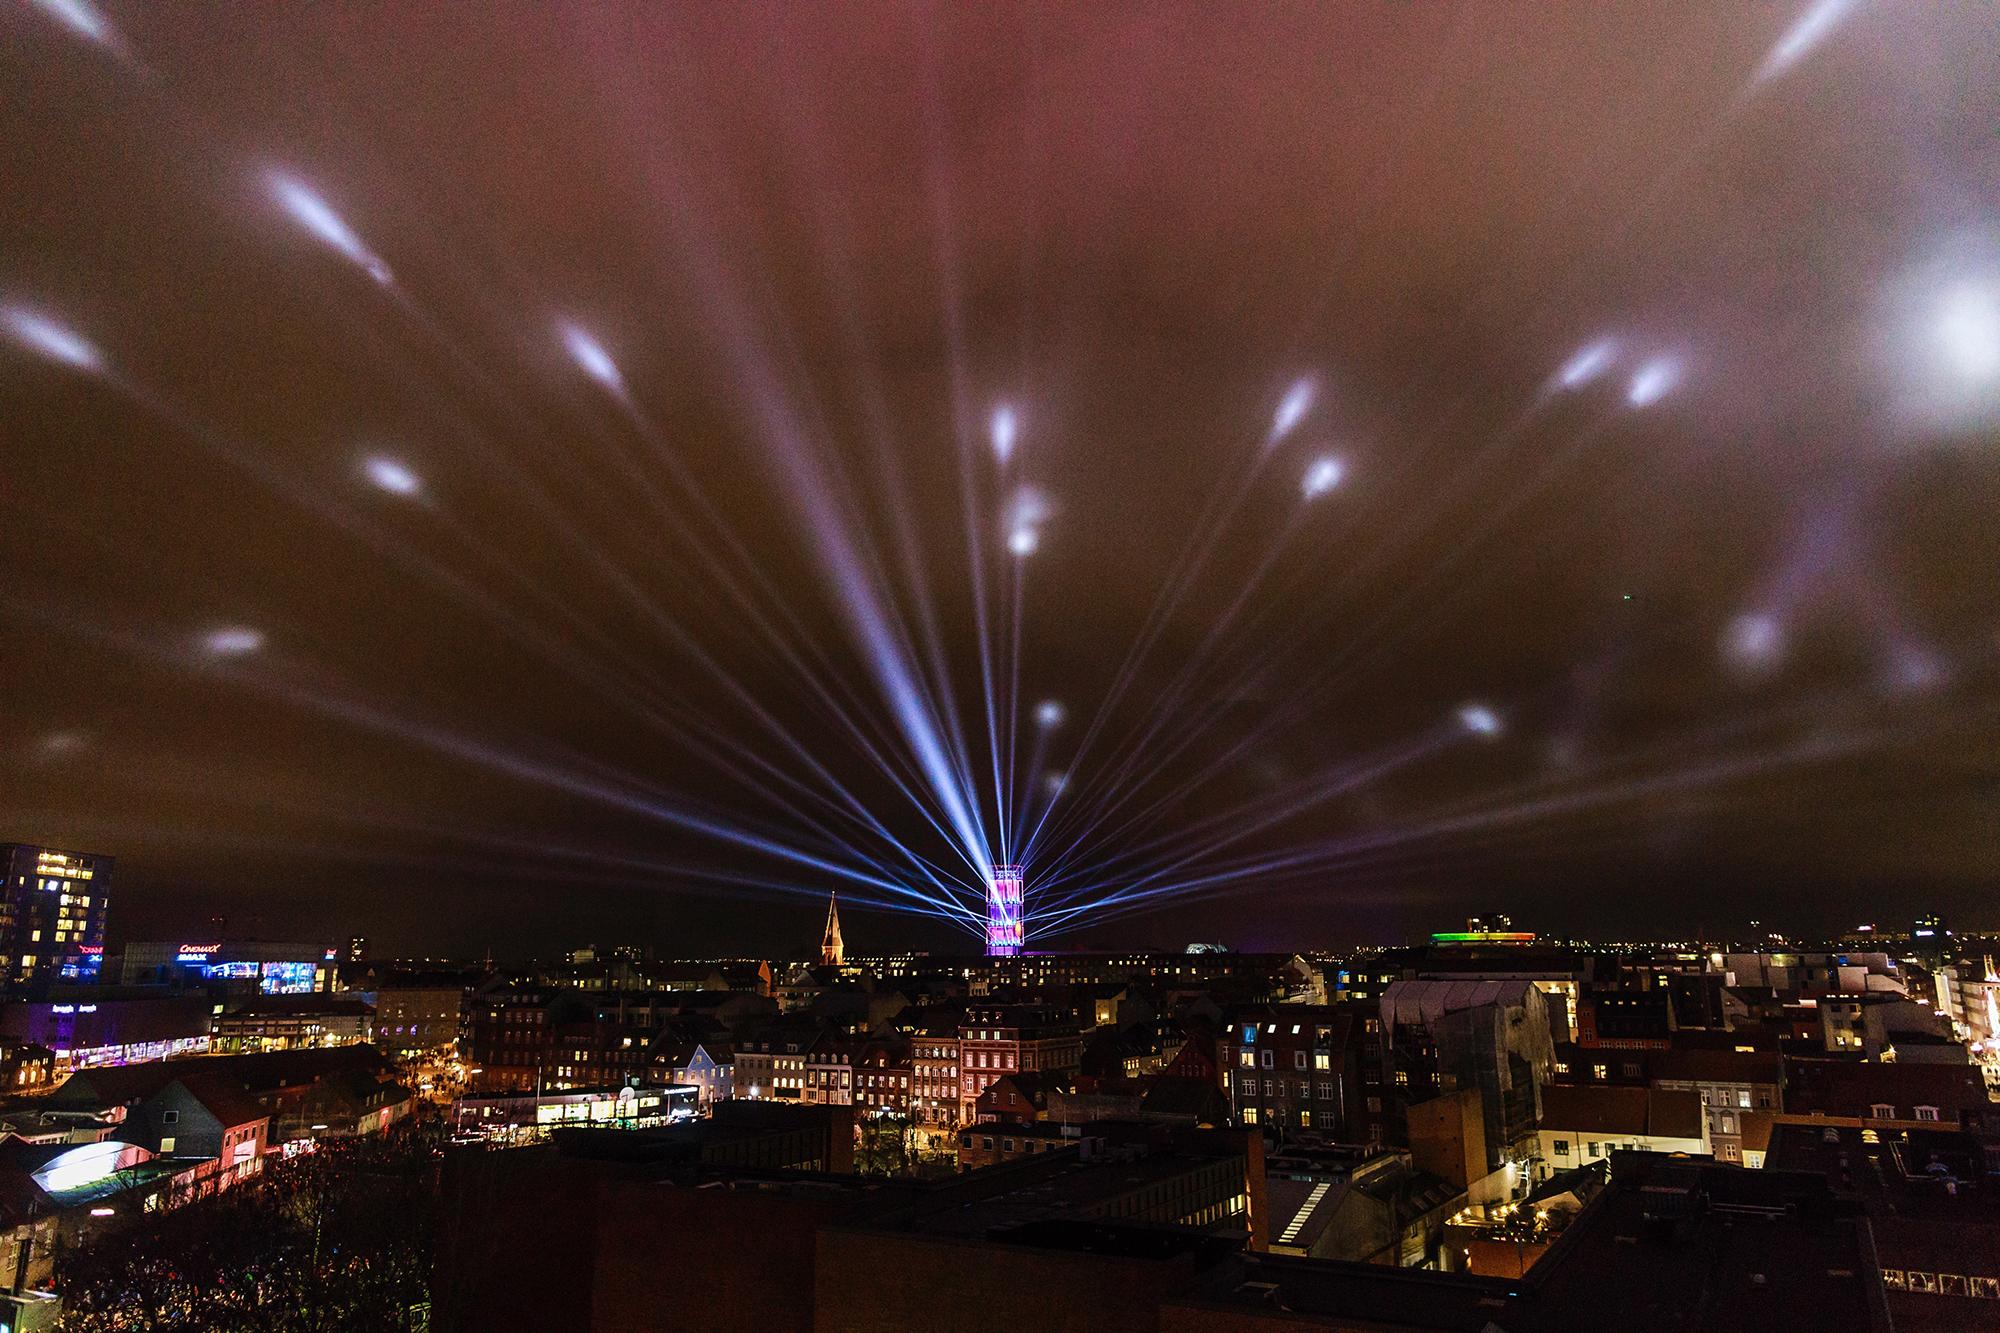 A broad view of Aarhus from above at night. in the center, a tower of light emits long reaching beams into the night sky, stretching all across the city.